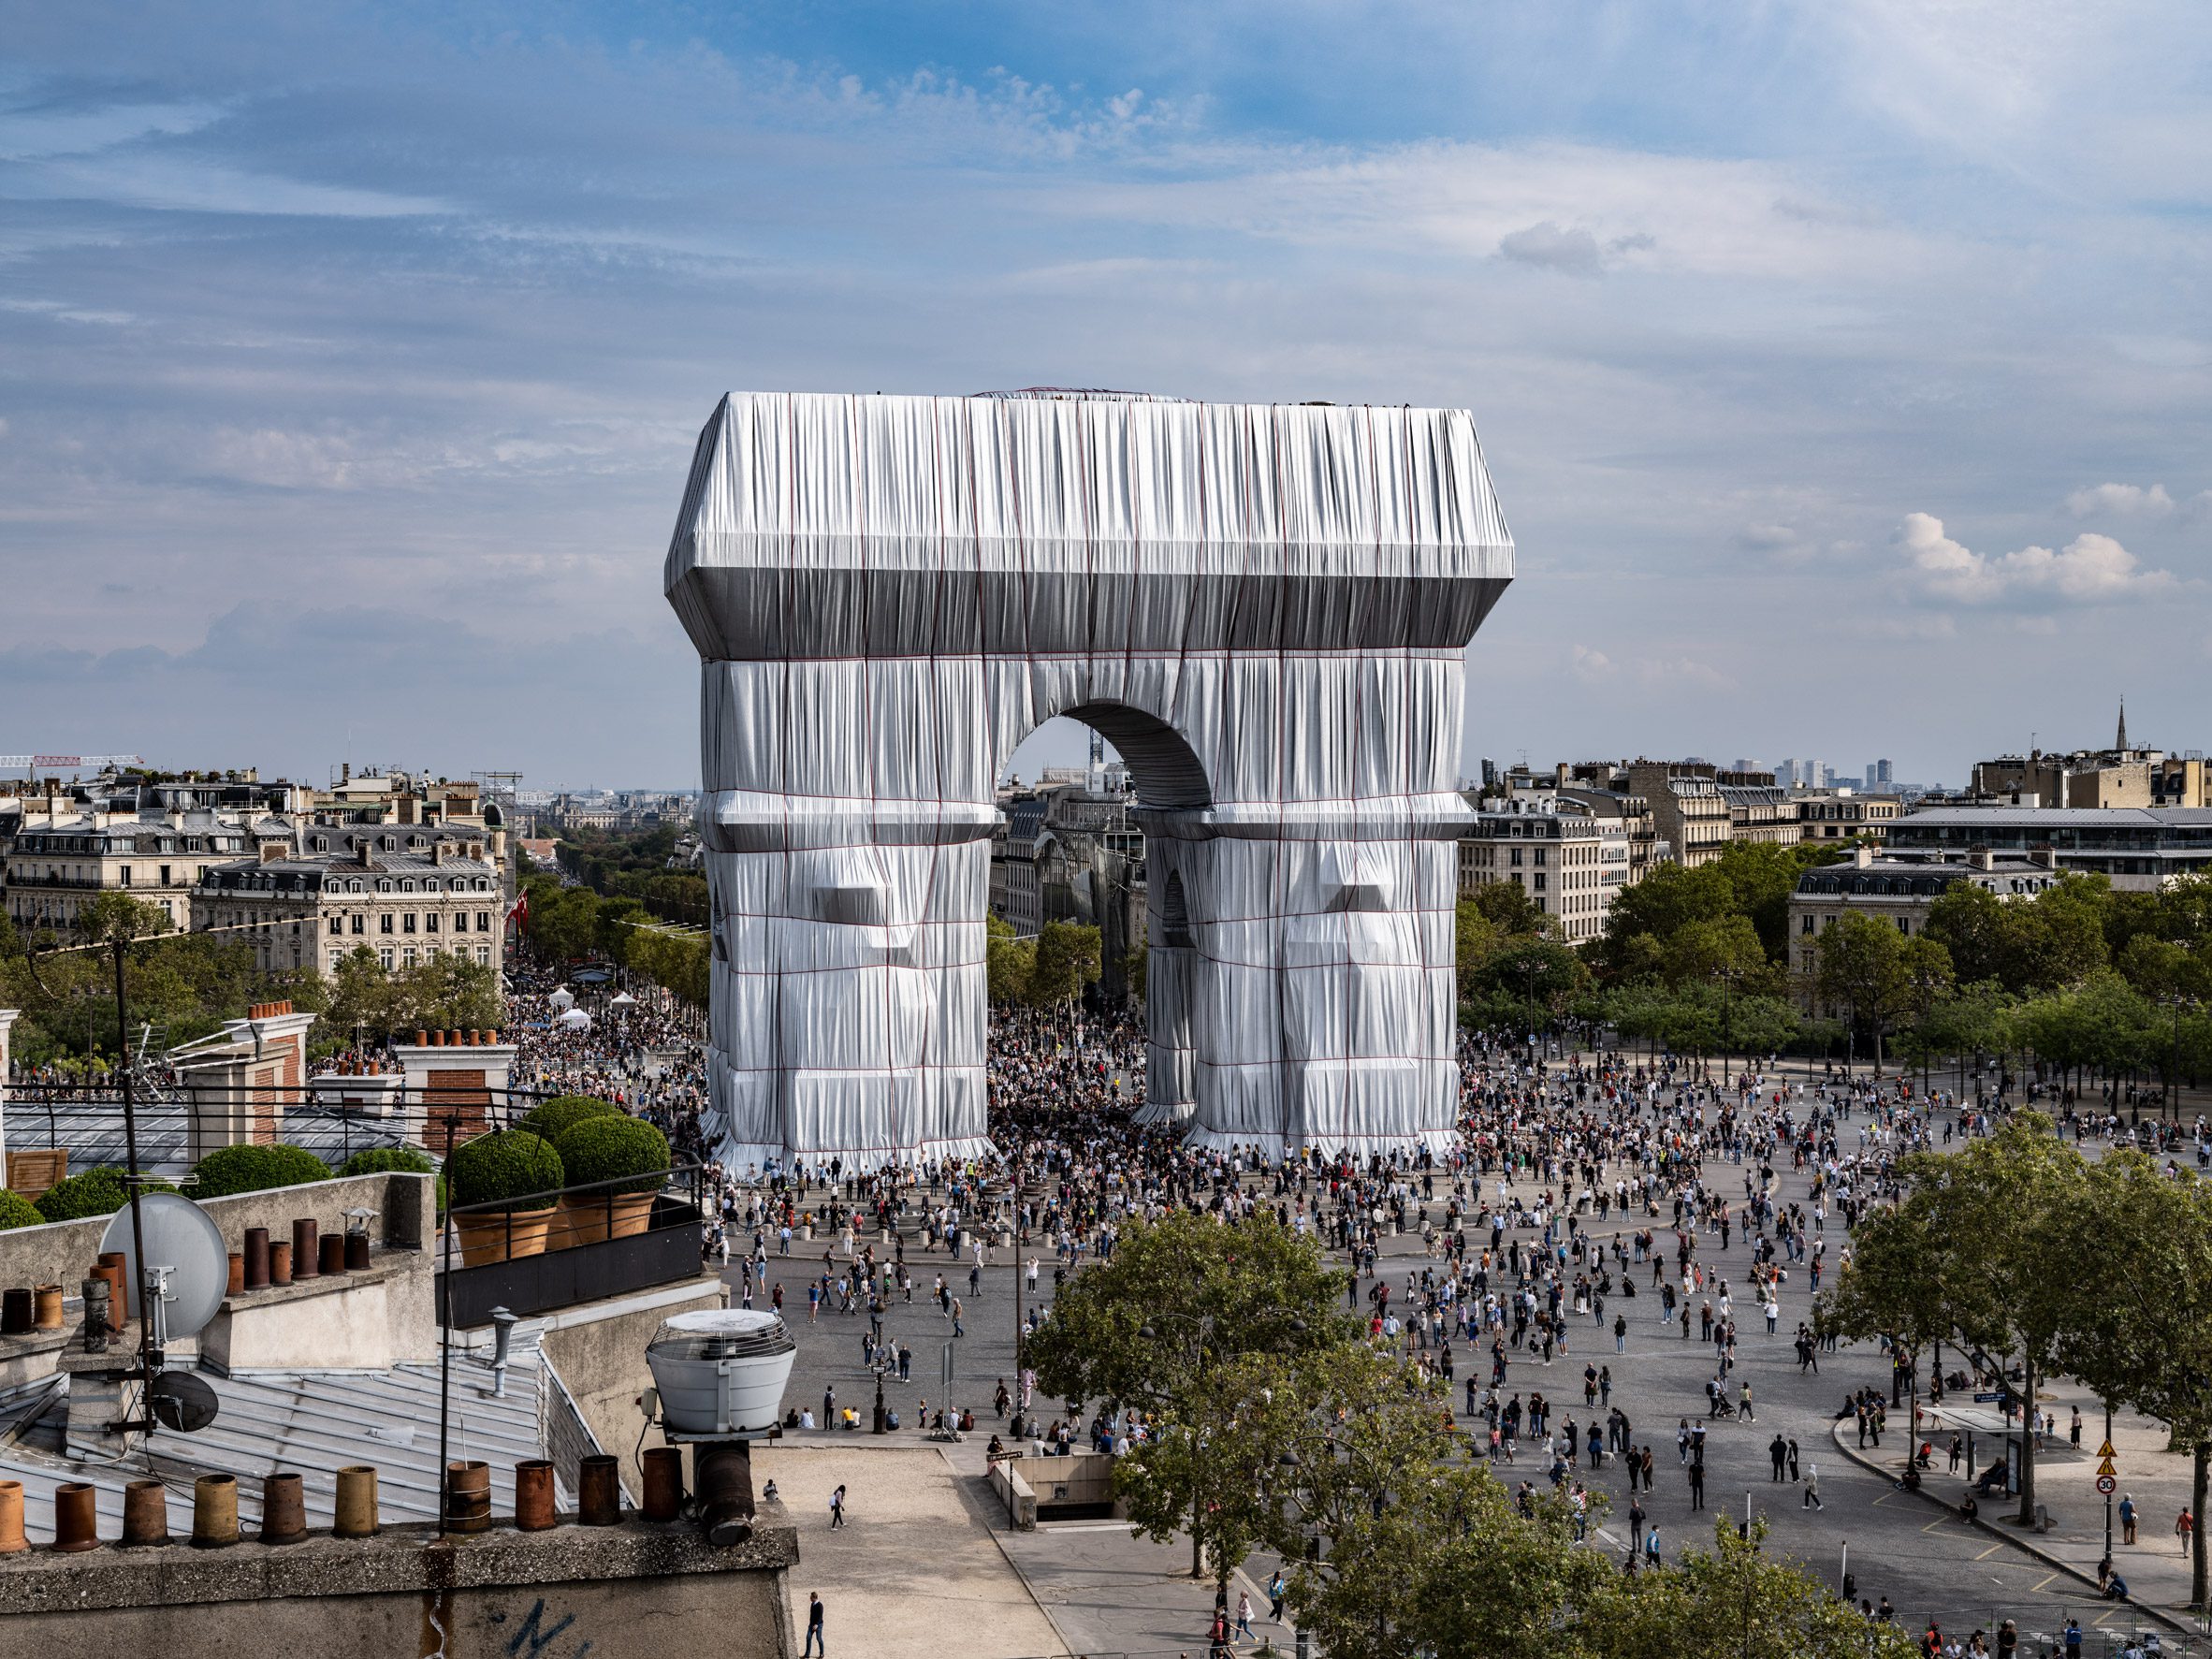 Christo and Jeanne-Claude's L'Arc de Triomphe Wrapped